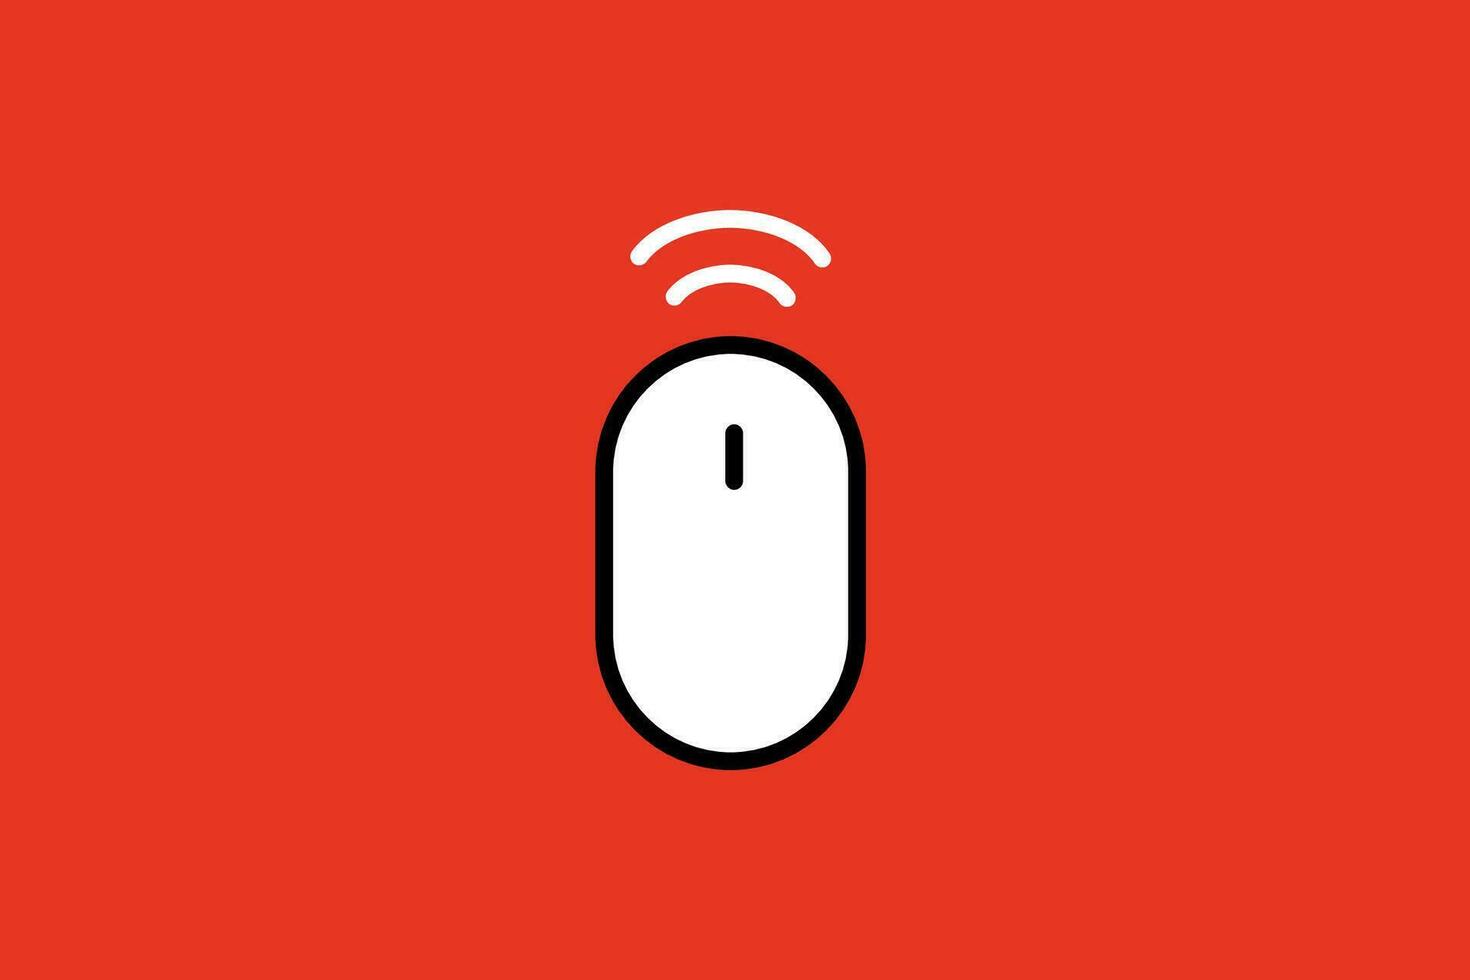 Wireless mouse icon on red background. Vector illustration in flat style.